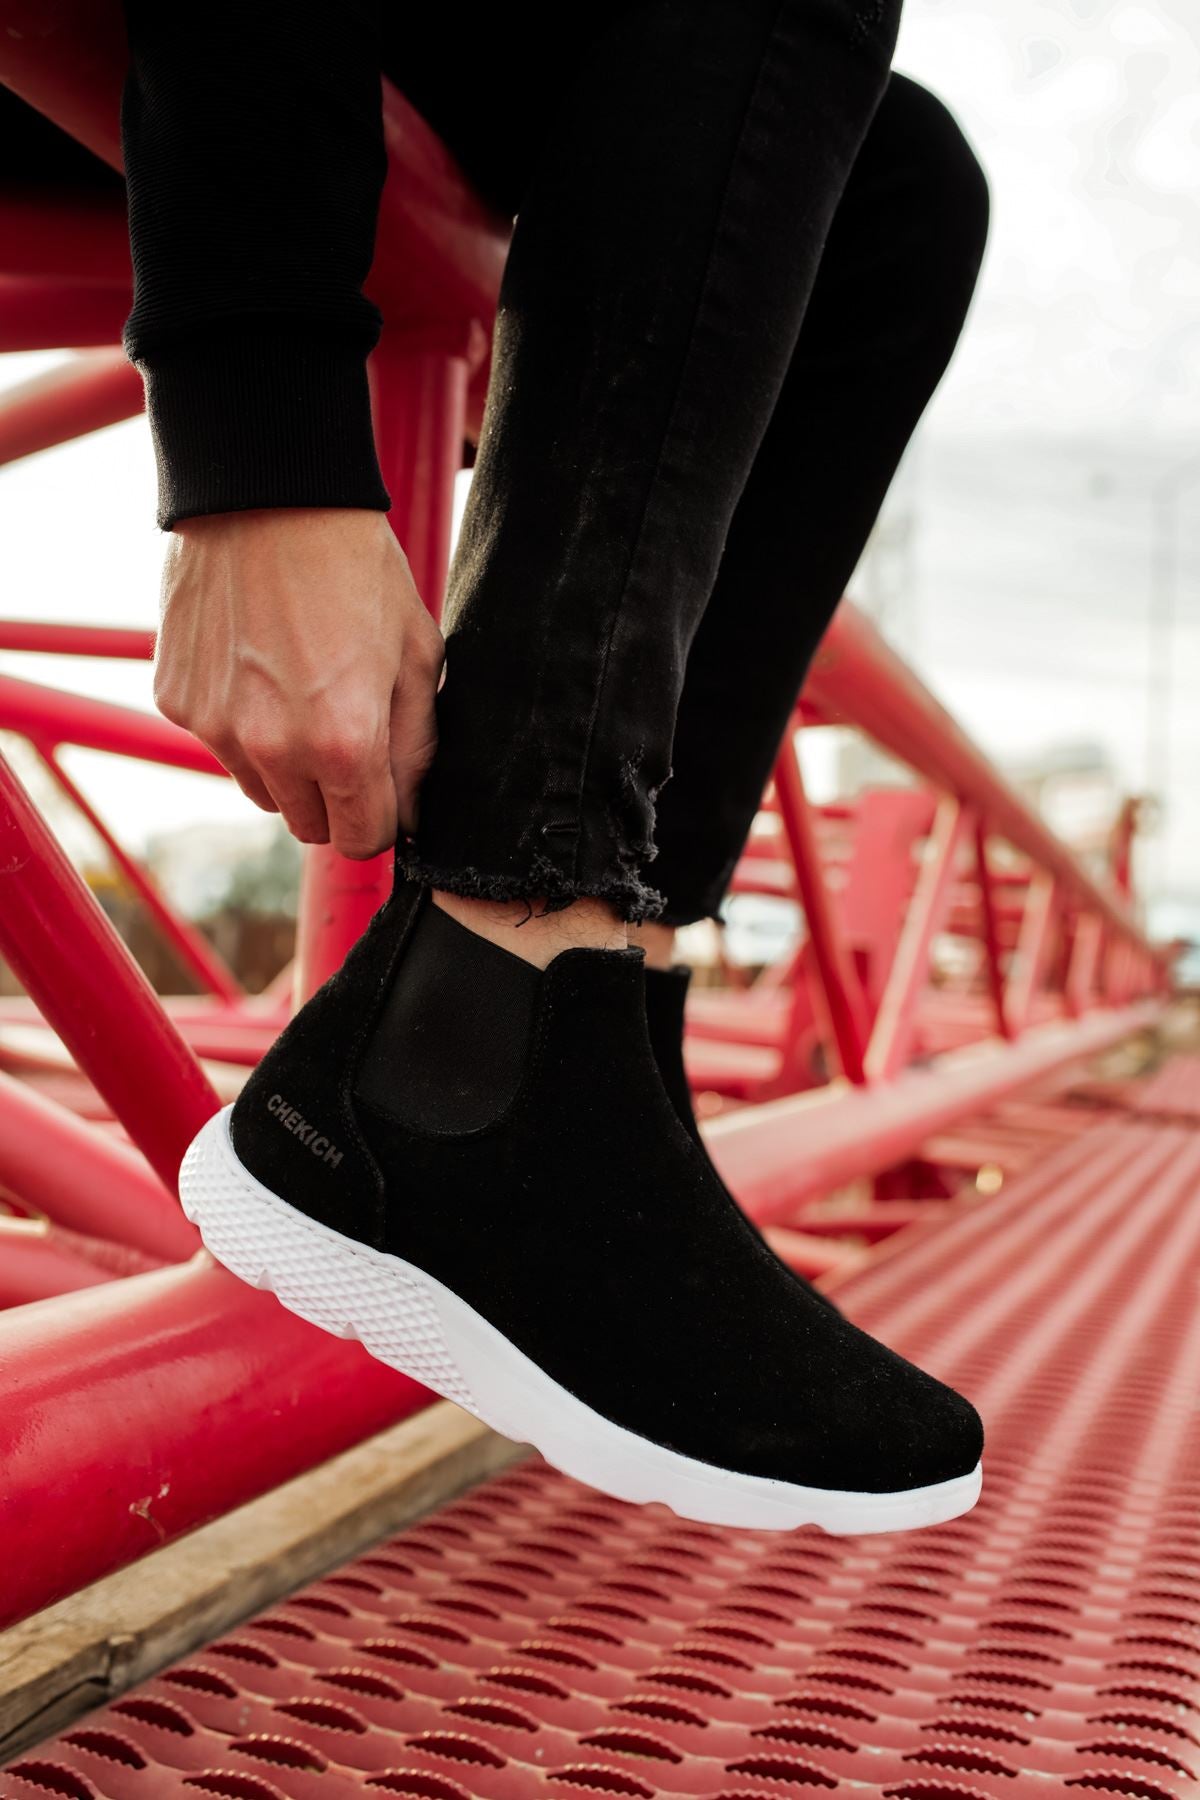 CH049 Men's Suede Black (White Sole) Sports Sneaker Boots - STREETMODE ™